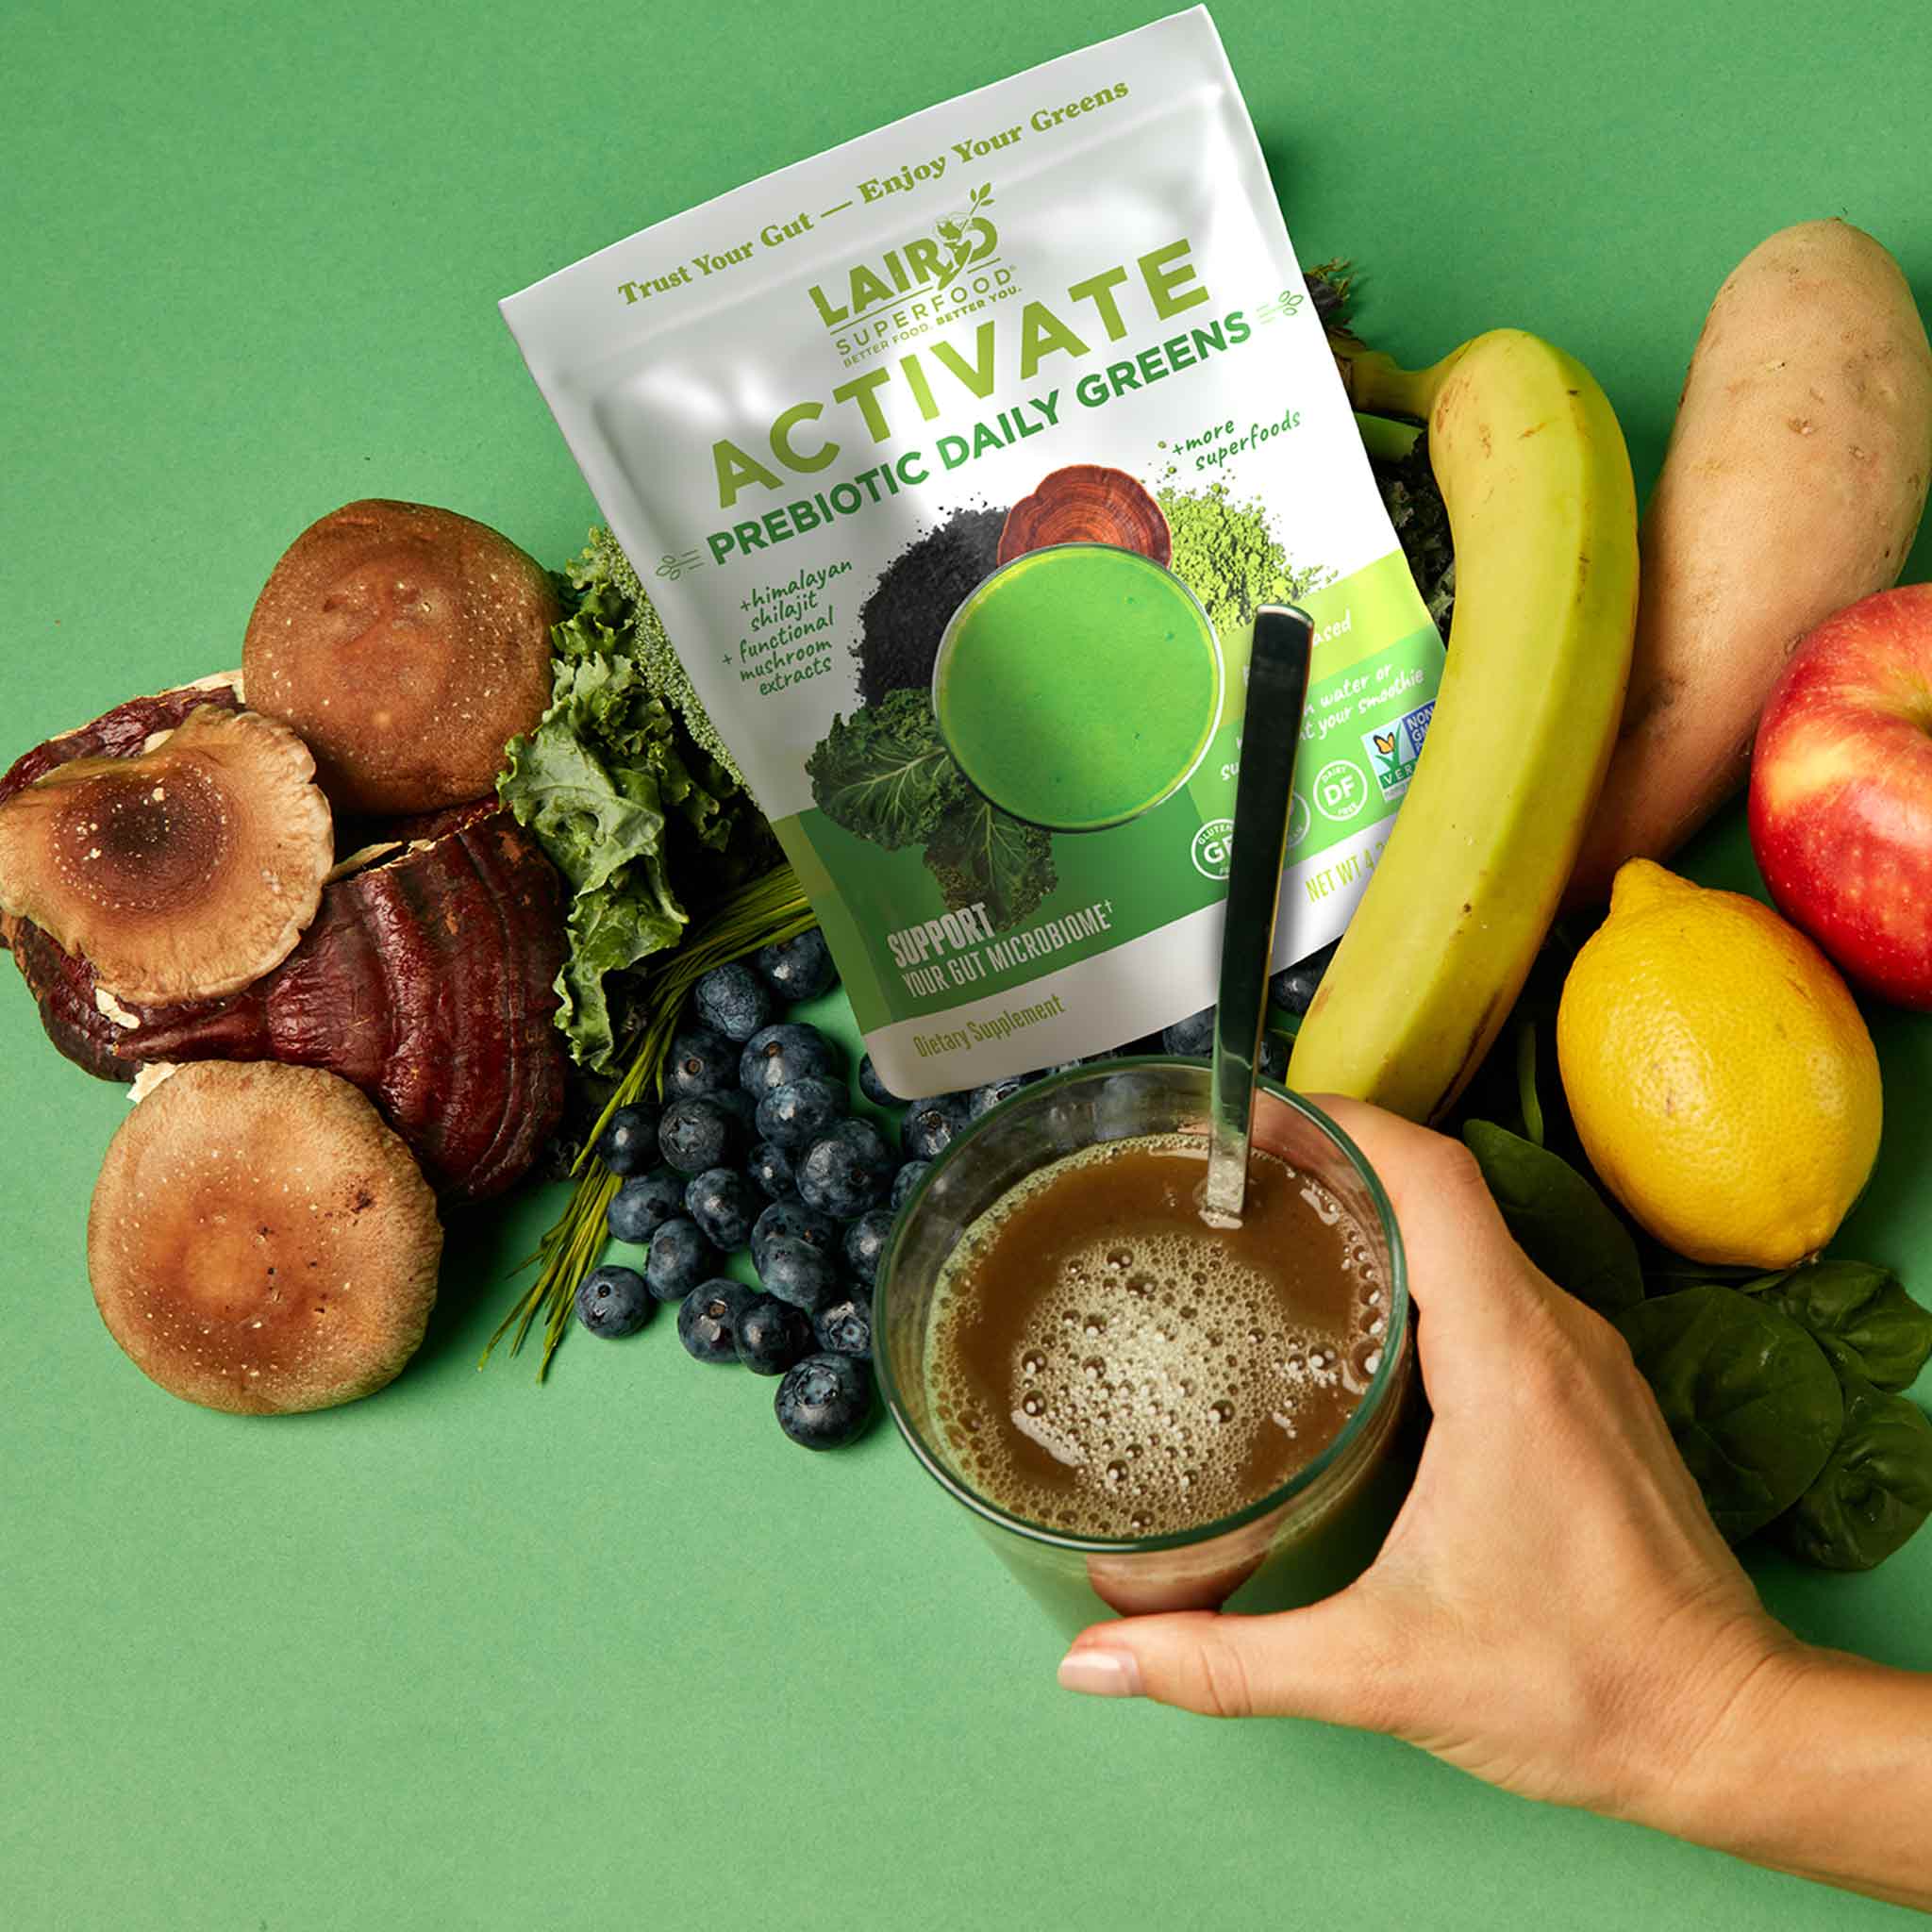 DIRECTIONS, TIPS & SERVINGS
Stir, shake, or blend 1 1/2 TBSP (12g) into 4-8 ounces of water, or beverage of choice.

Pro tip: Blend into smoothies, protein shakes, or even your glass of water. The fresh green taste complemented by blueberry, acai, and lemon makes this a delicious daily ritual.